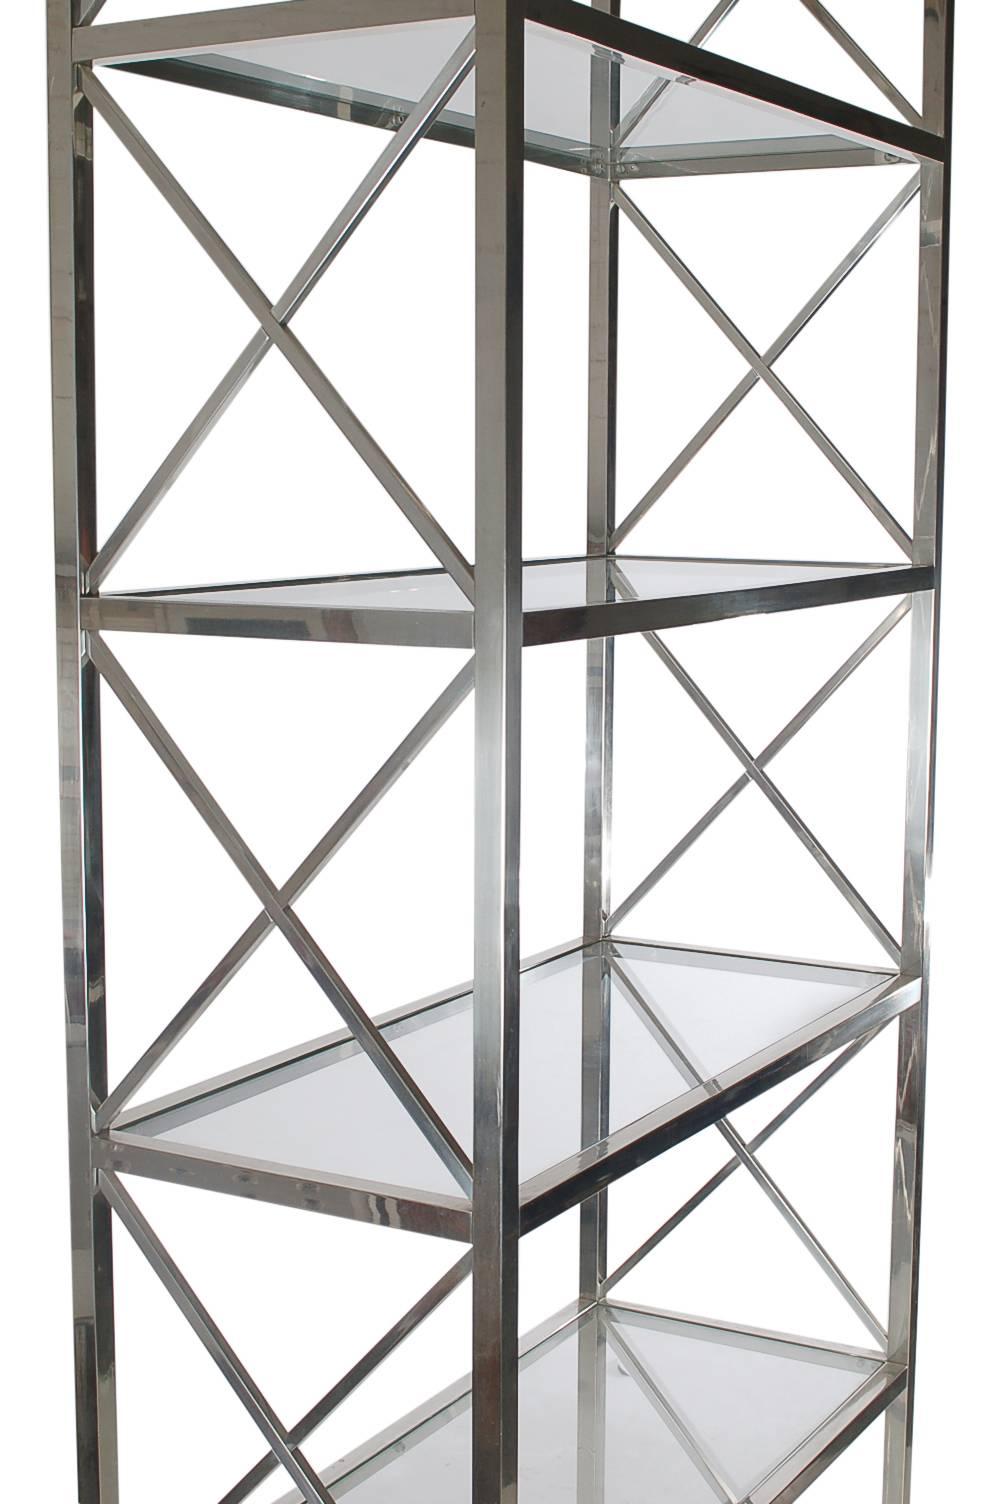 An extra tall and extra handsome etagere in the style of Maison Jansen or Milo Baughman. It features a polished aluminium frame with several heavy clear glass shelves.